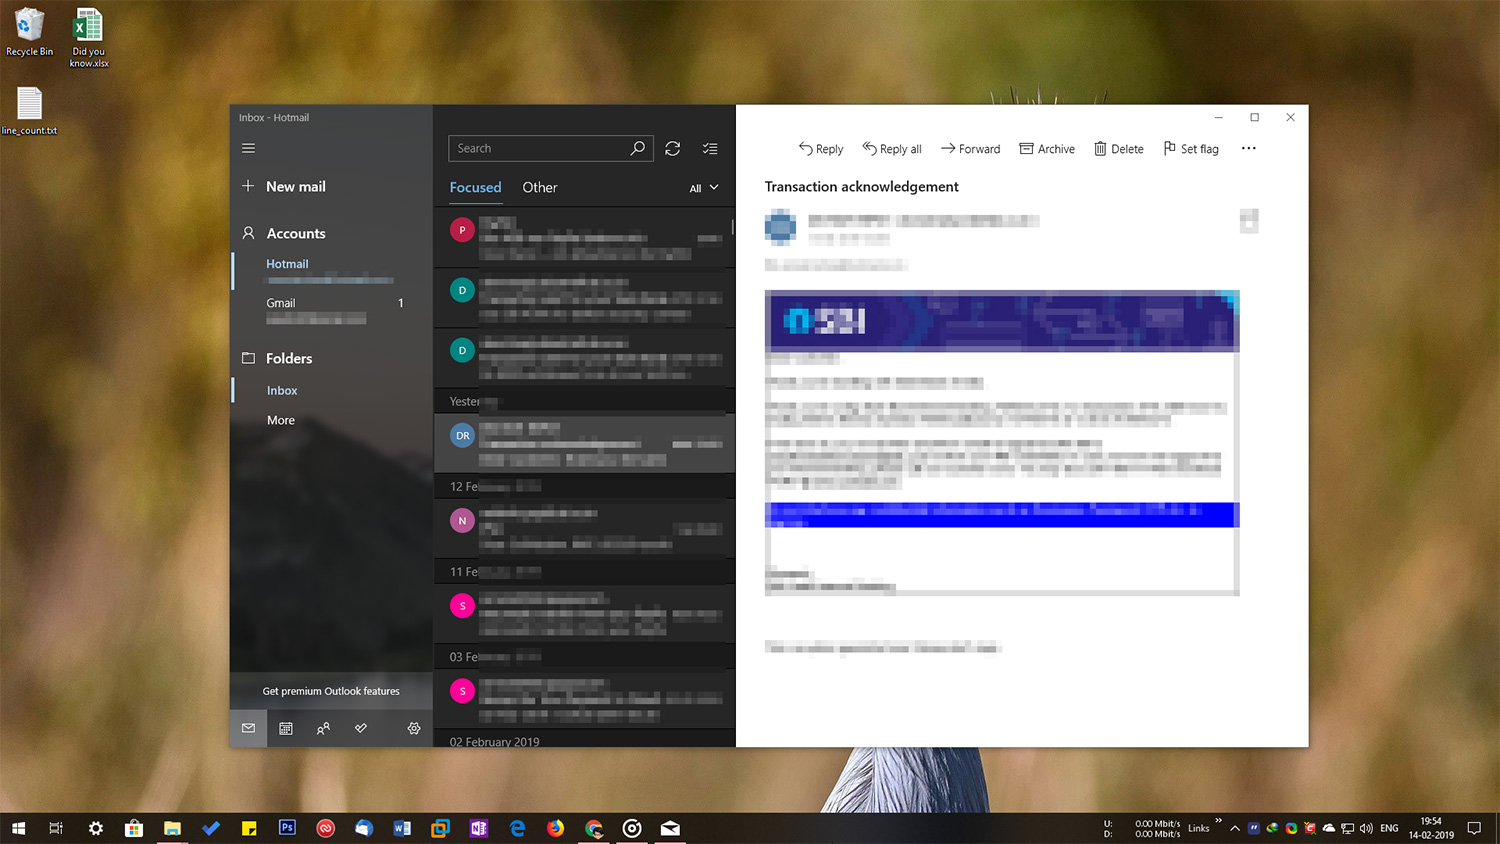 delete email account in windows 10 mail